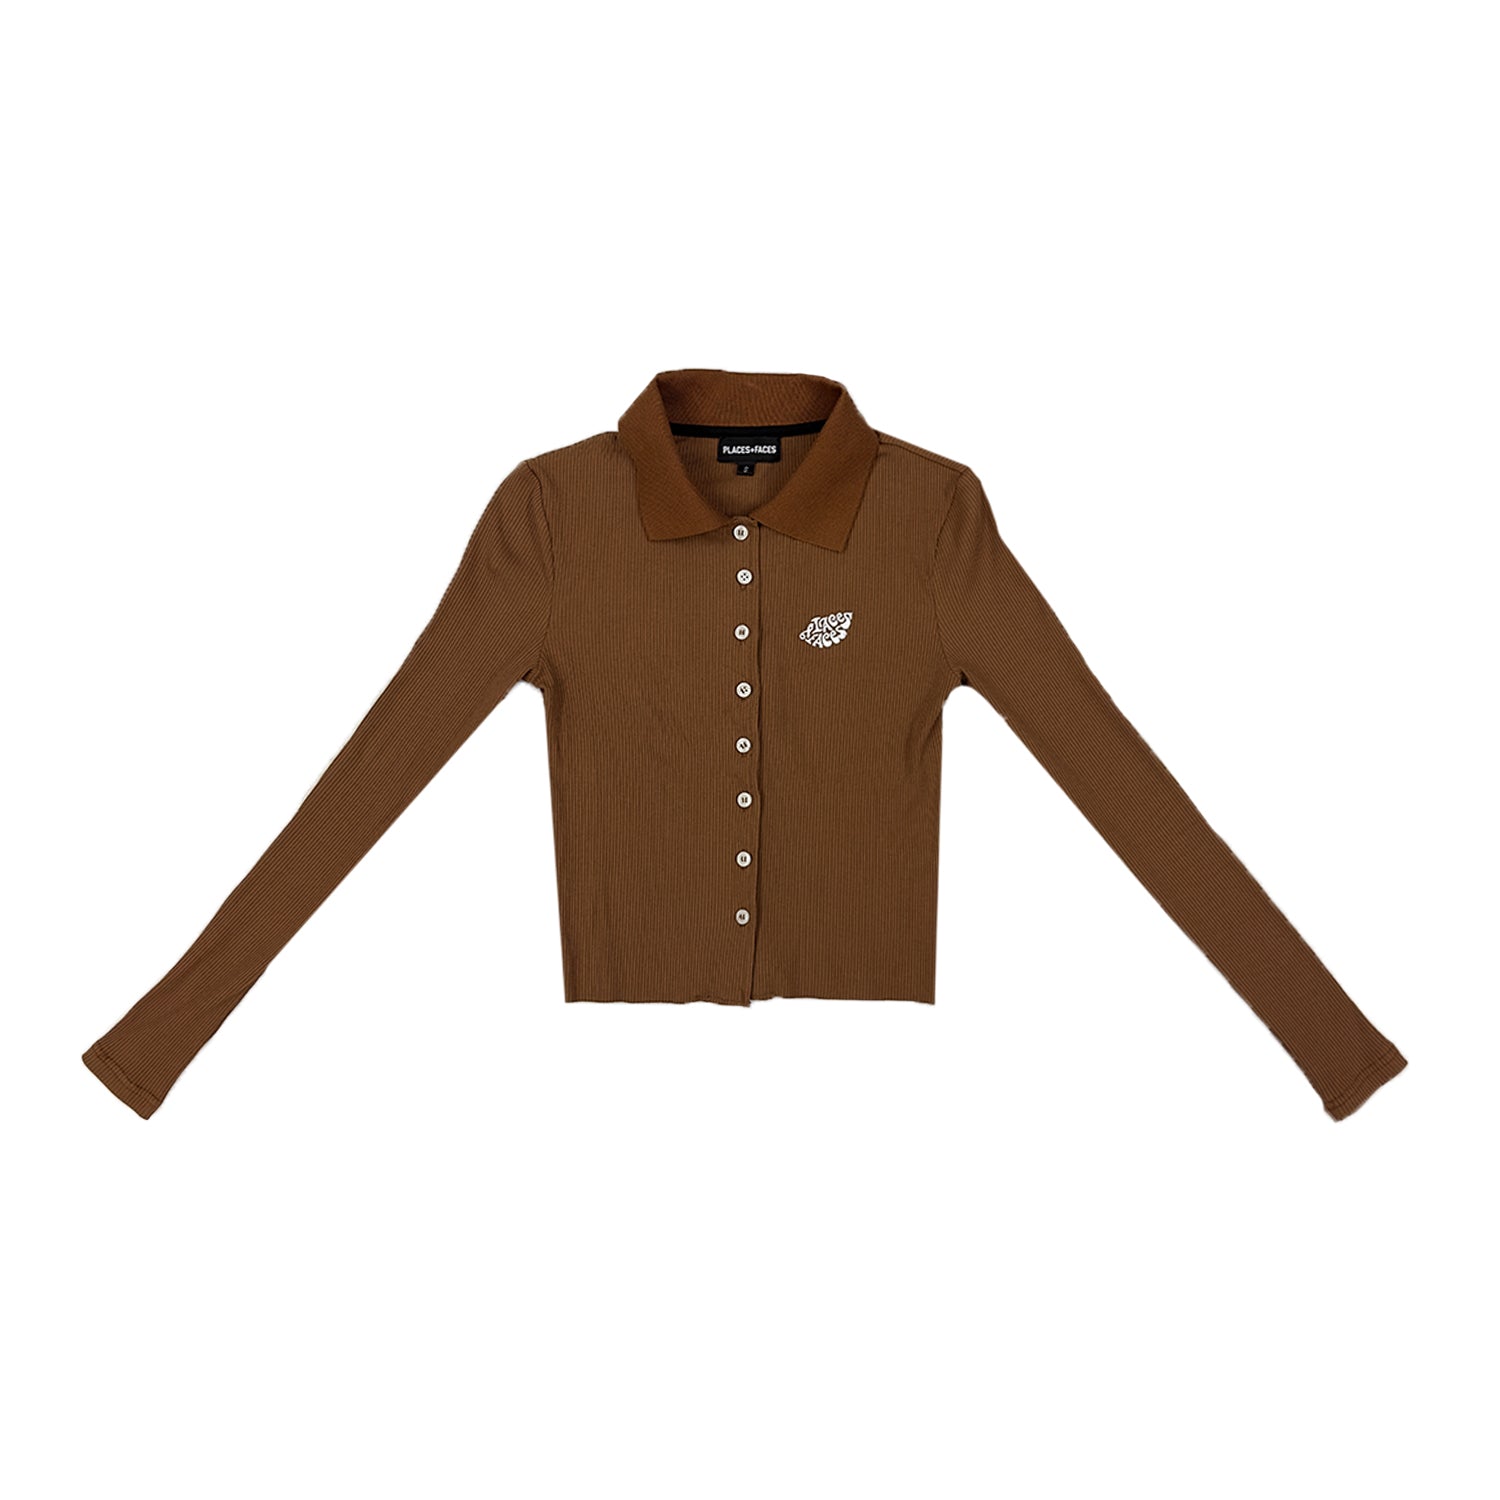 LONGSLEEVE BUTTON UP POLO - BROWN